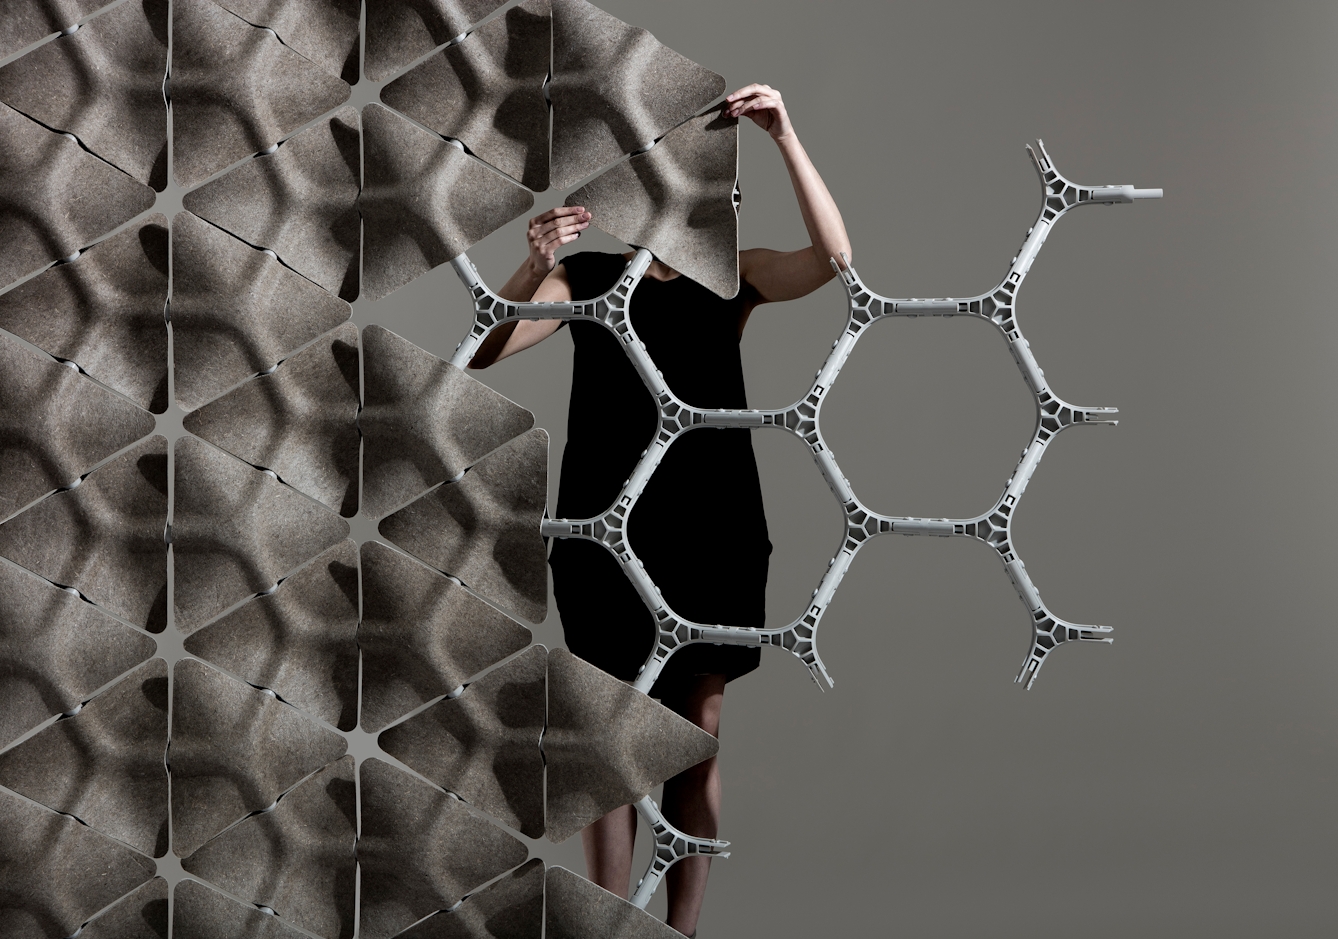 Colour photograph of a person behind a hexagonal grey plastic frame, who is in the process of affixing an grey rough-textured triangle to form a wall with other tessellated tiles on the frame.